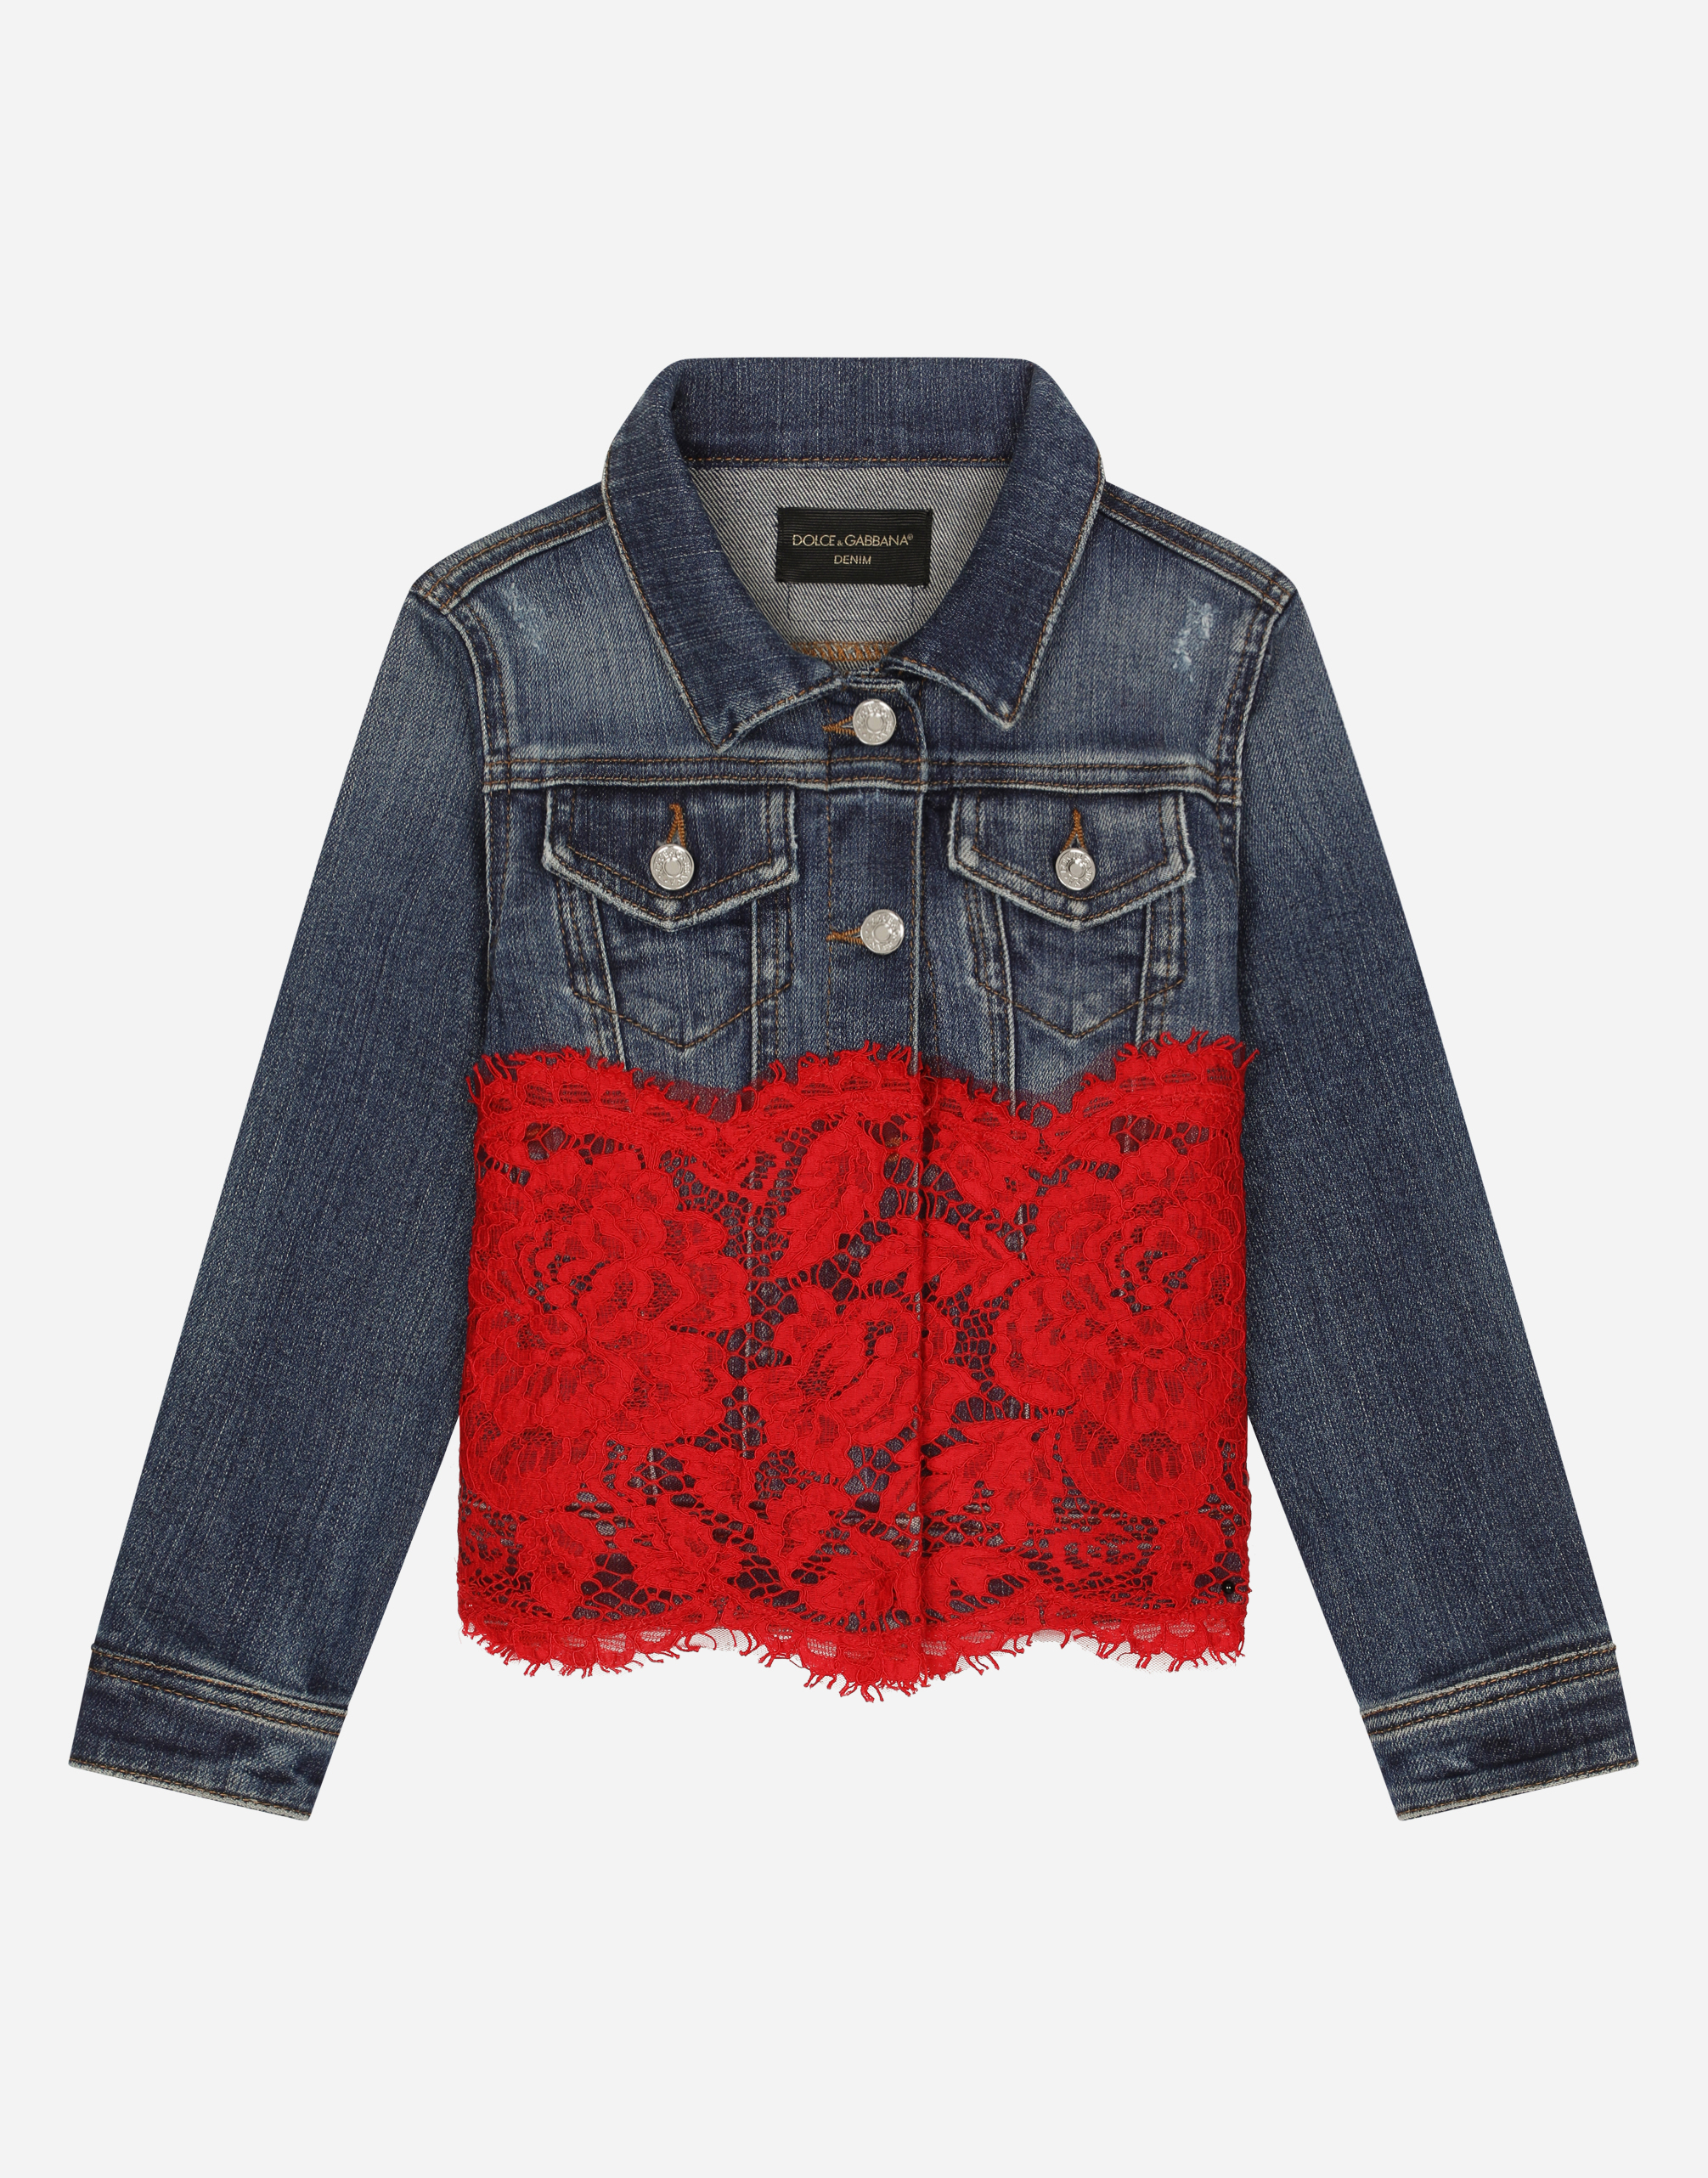 Denim jacket with lace insert in Multicolor